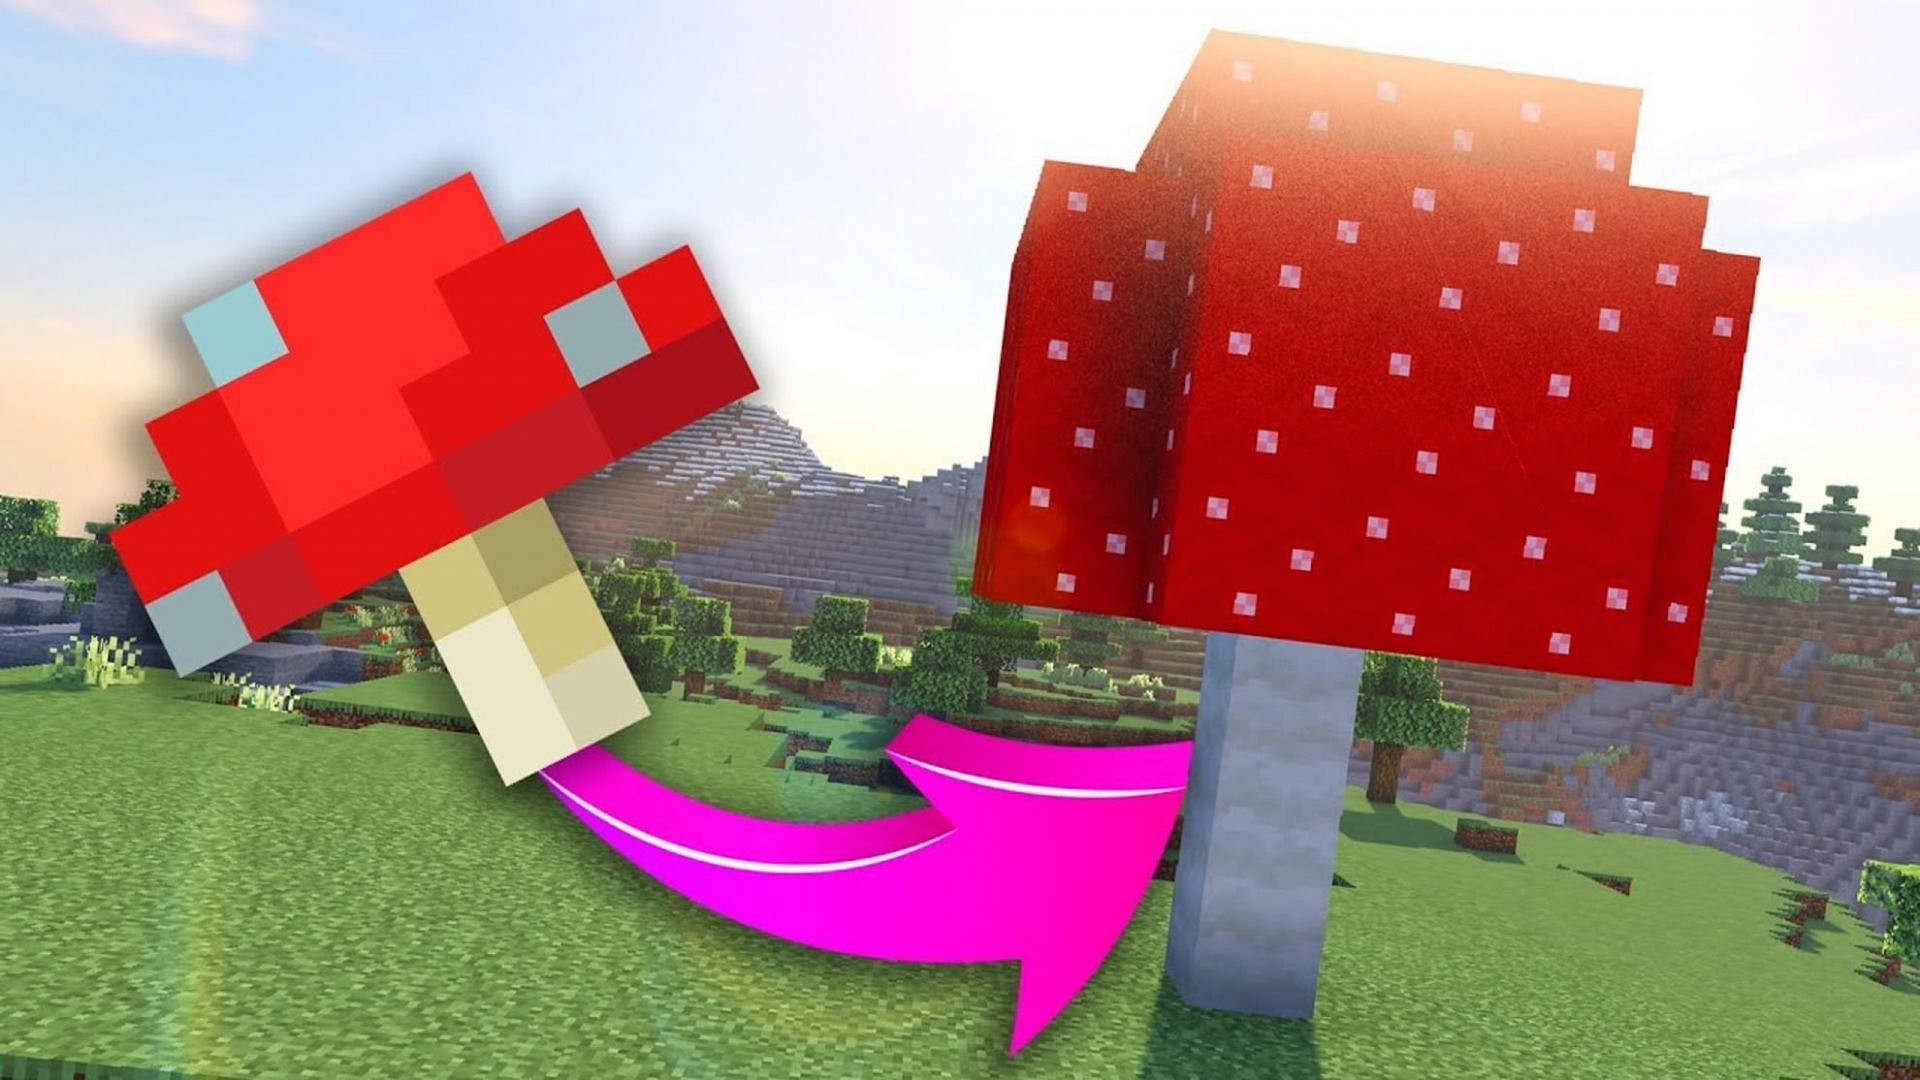 Mushrooms are exciting items in Minecraft (Image via YouTube/OMGcraft)